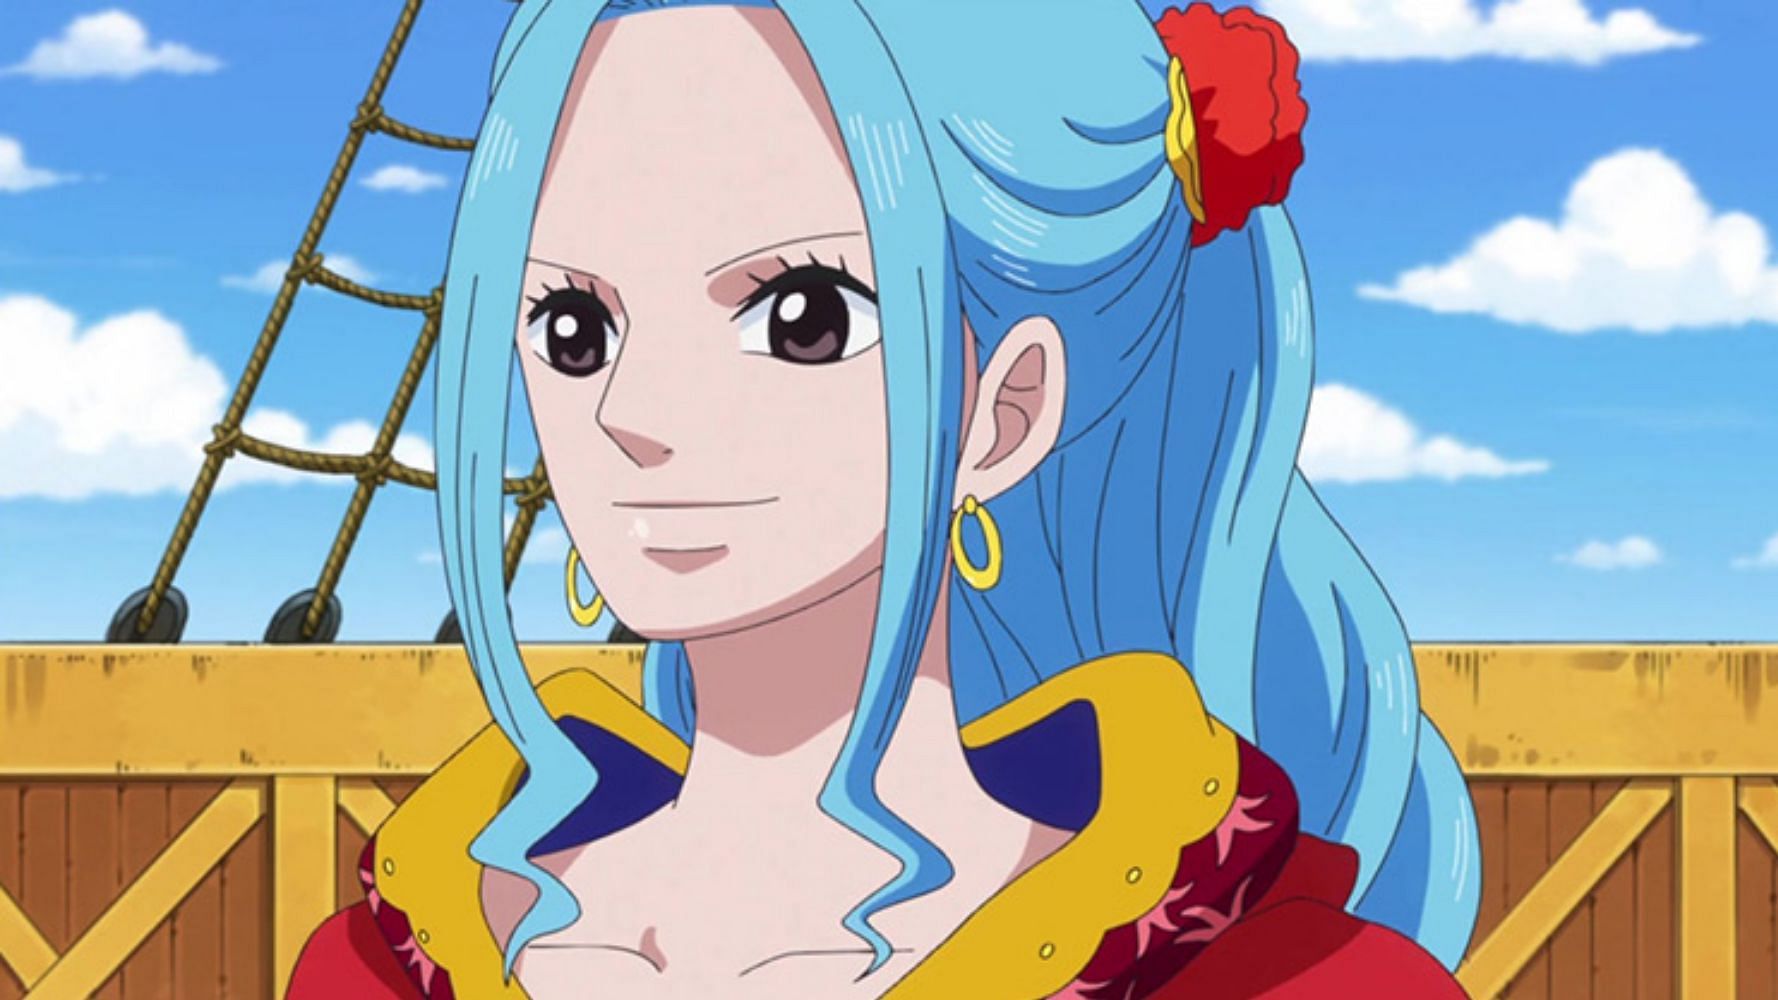 Kinda late, but happiest birthday to one of the best side characters in all  of anime, and my favorite character (obviously) : r/OnePiece